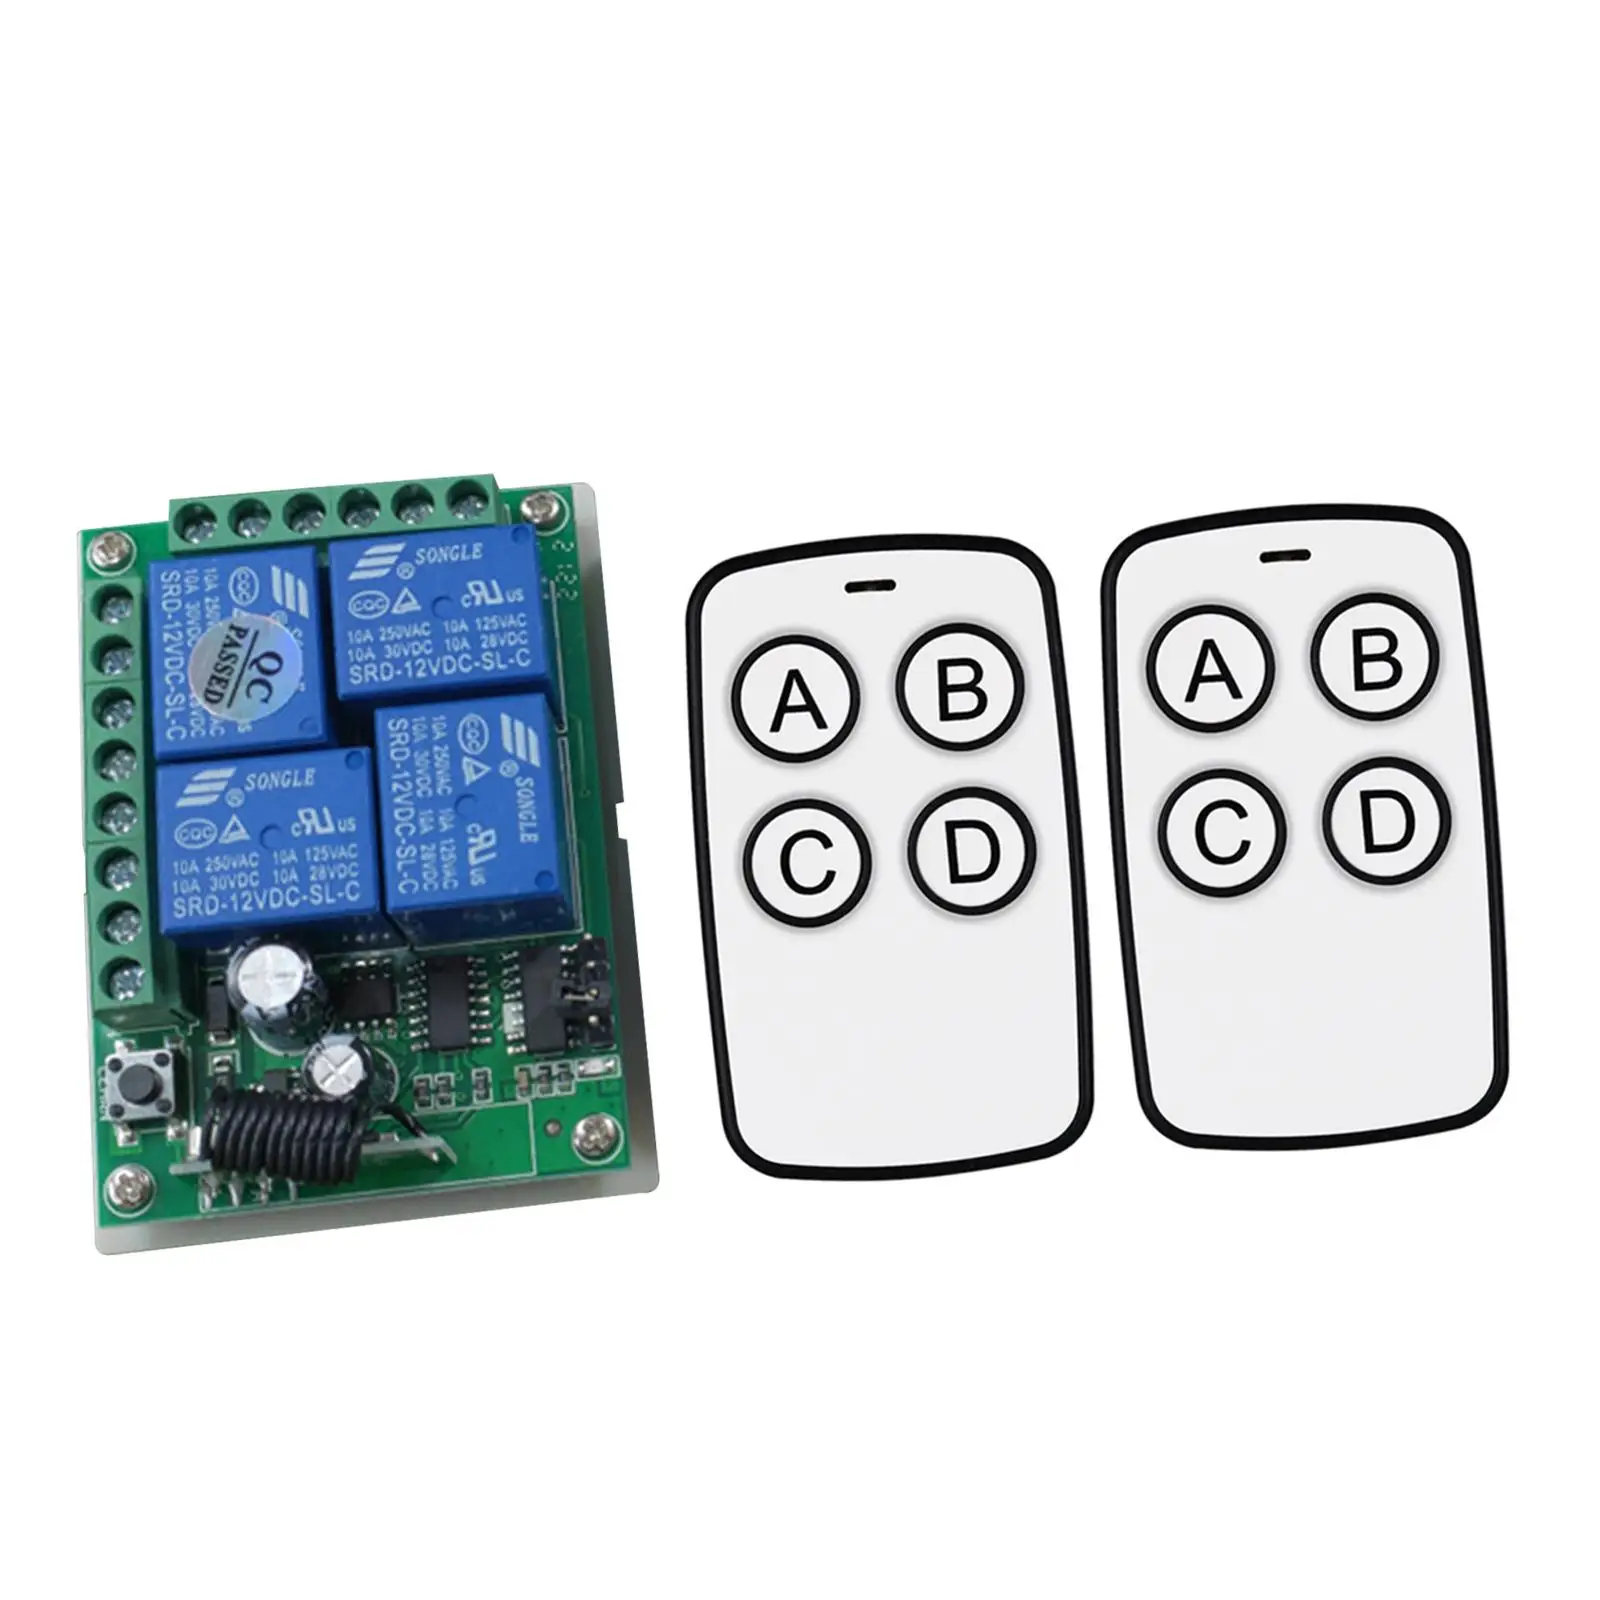 Remote Control Relay 4 Channel Remote Switch for Cars Lights Garage Doors